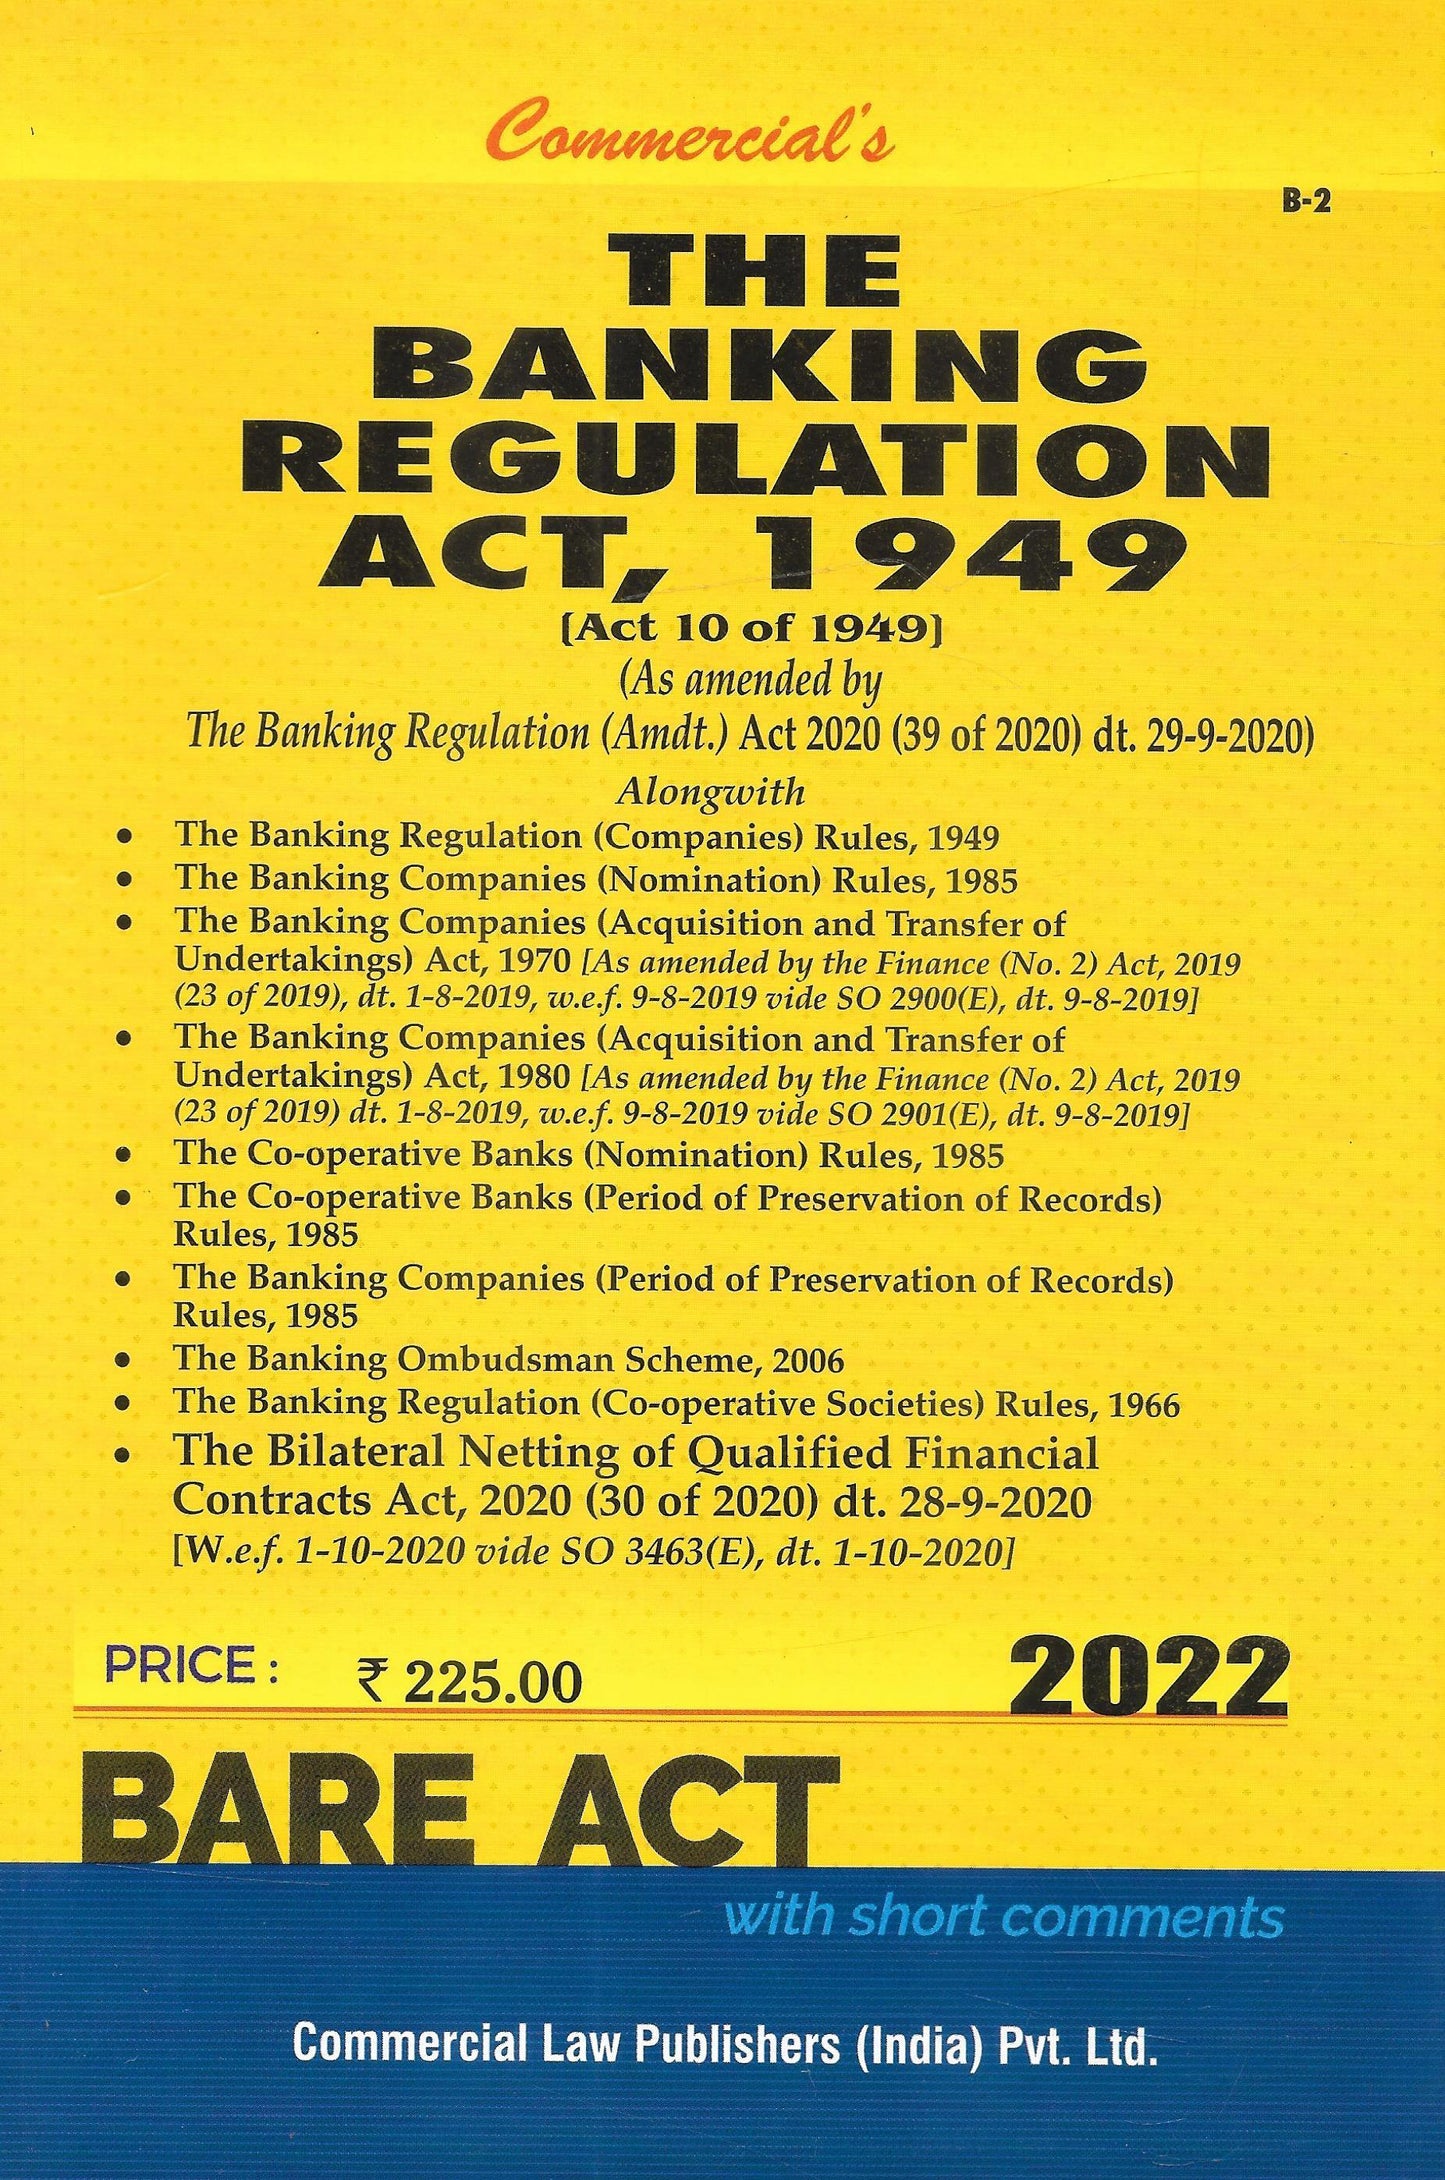 The Banking Regulations Act, 1949